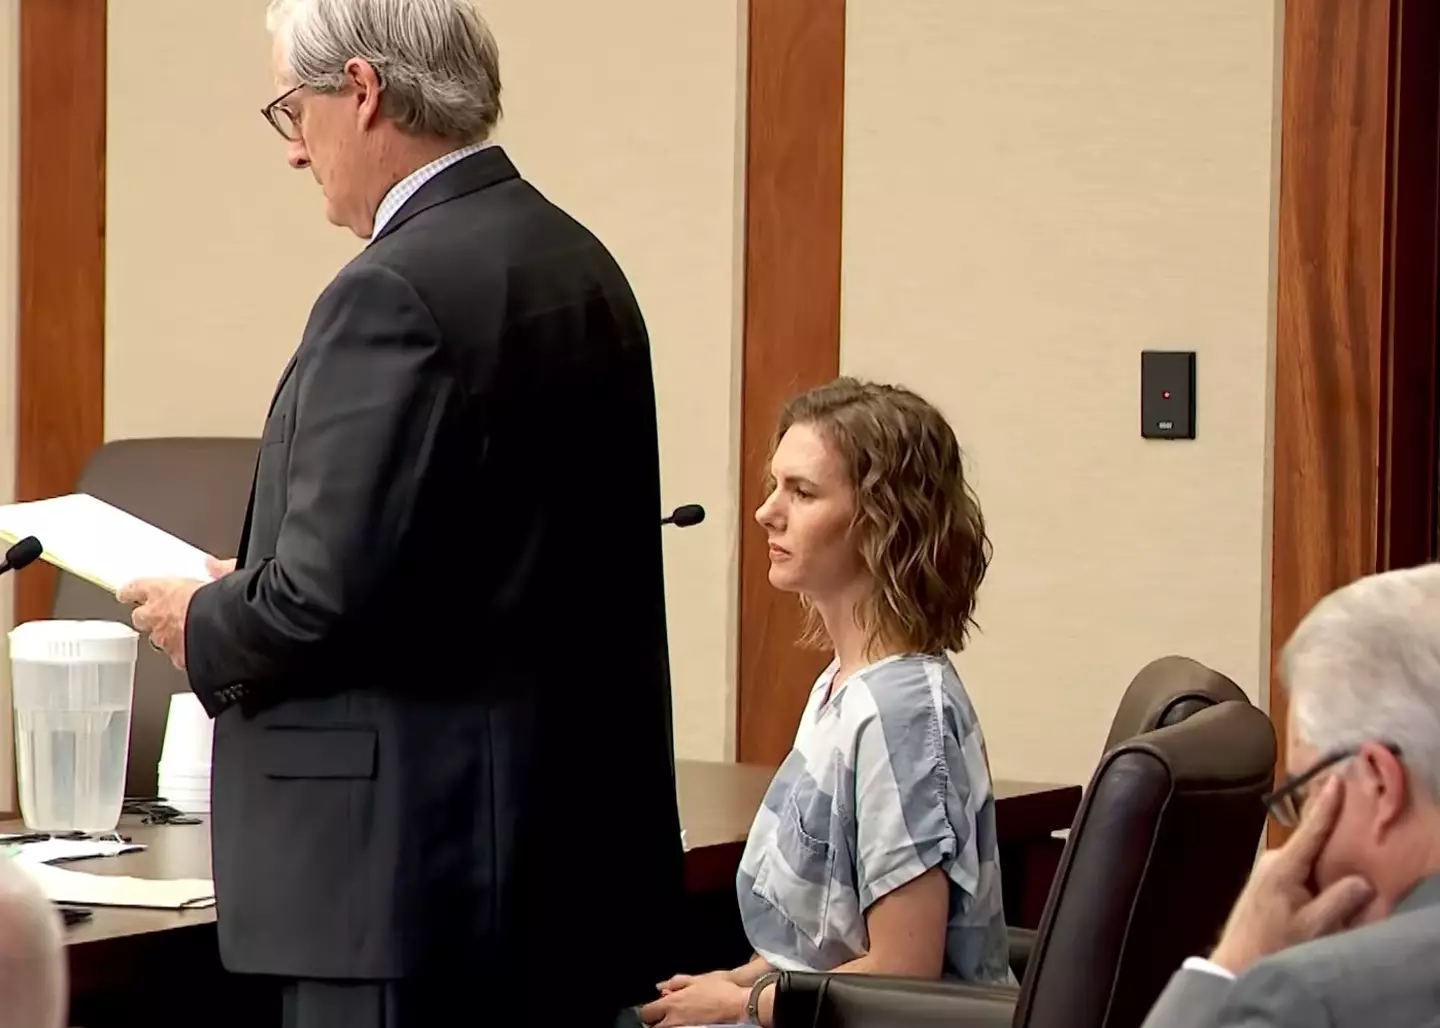 Ruby Franke received her sentence earlier this week after pleading guilty to child abuse.